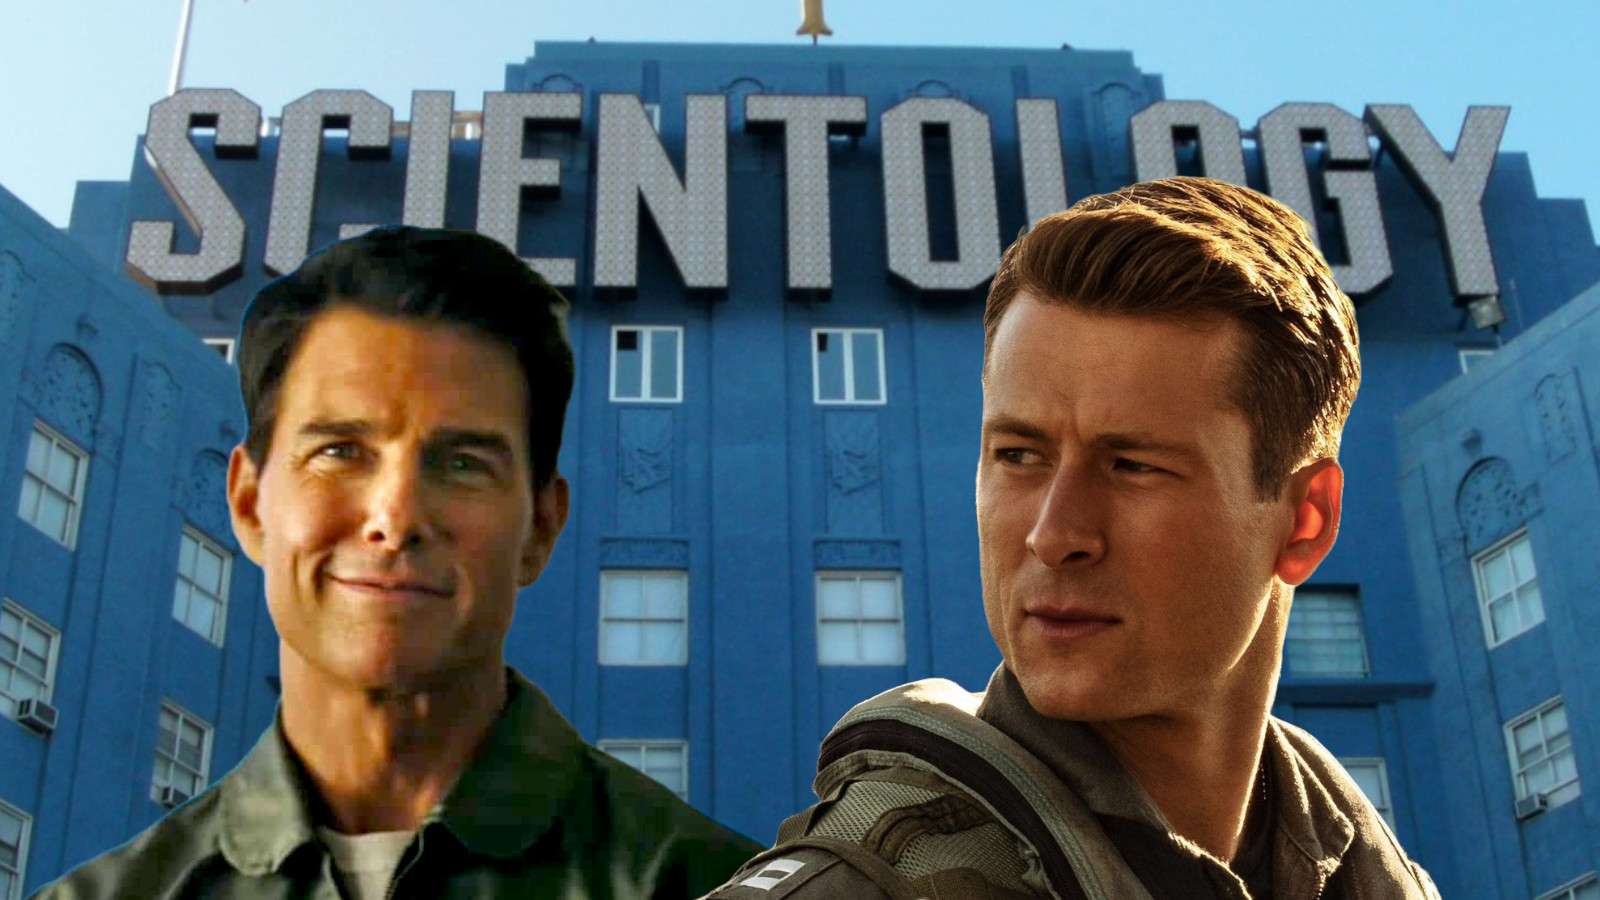 Tom Cruise and Glen Powell in Top Gun: Maverick, with the Scientology church behind them